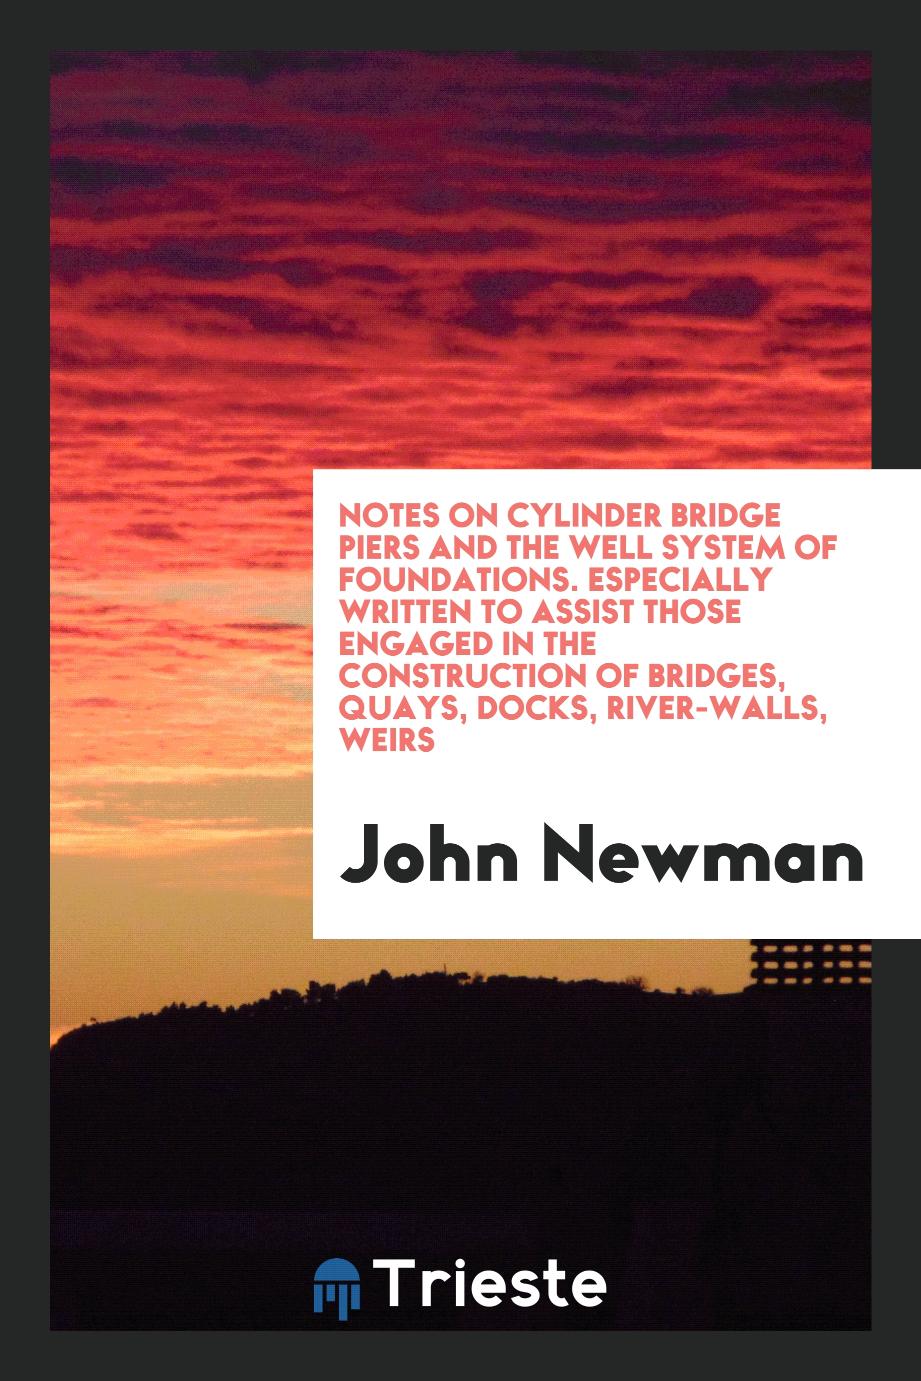 Notes on Cylinder Bridge Piers and the Well System of Foundations. Especially Written to Assist Those Engaged in the Construction of Bridges, Quays, Docks, River-Walls, Weirs